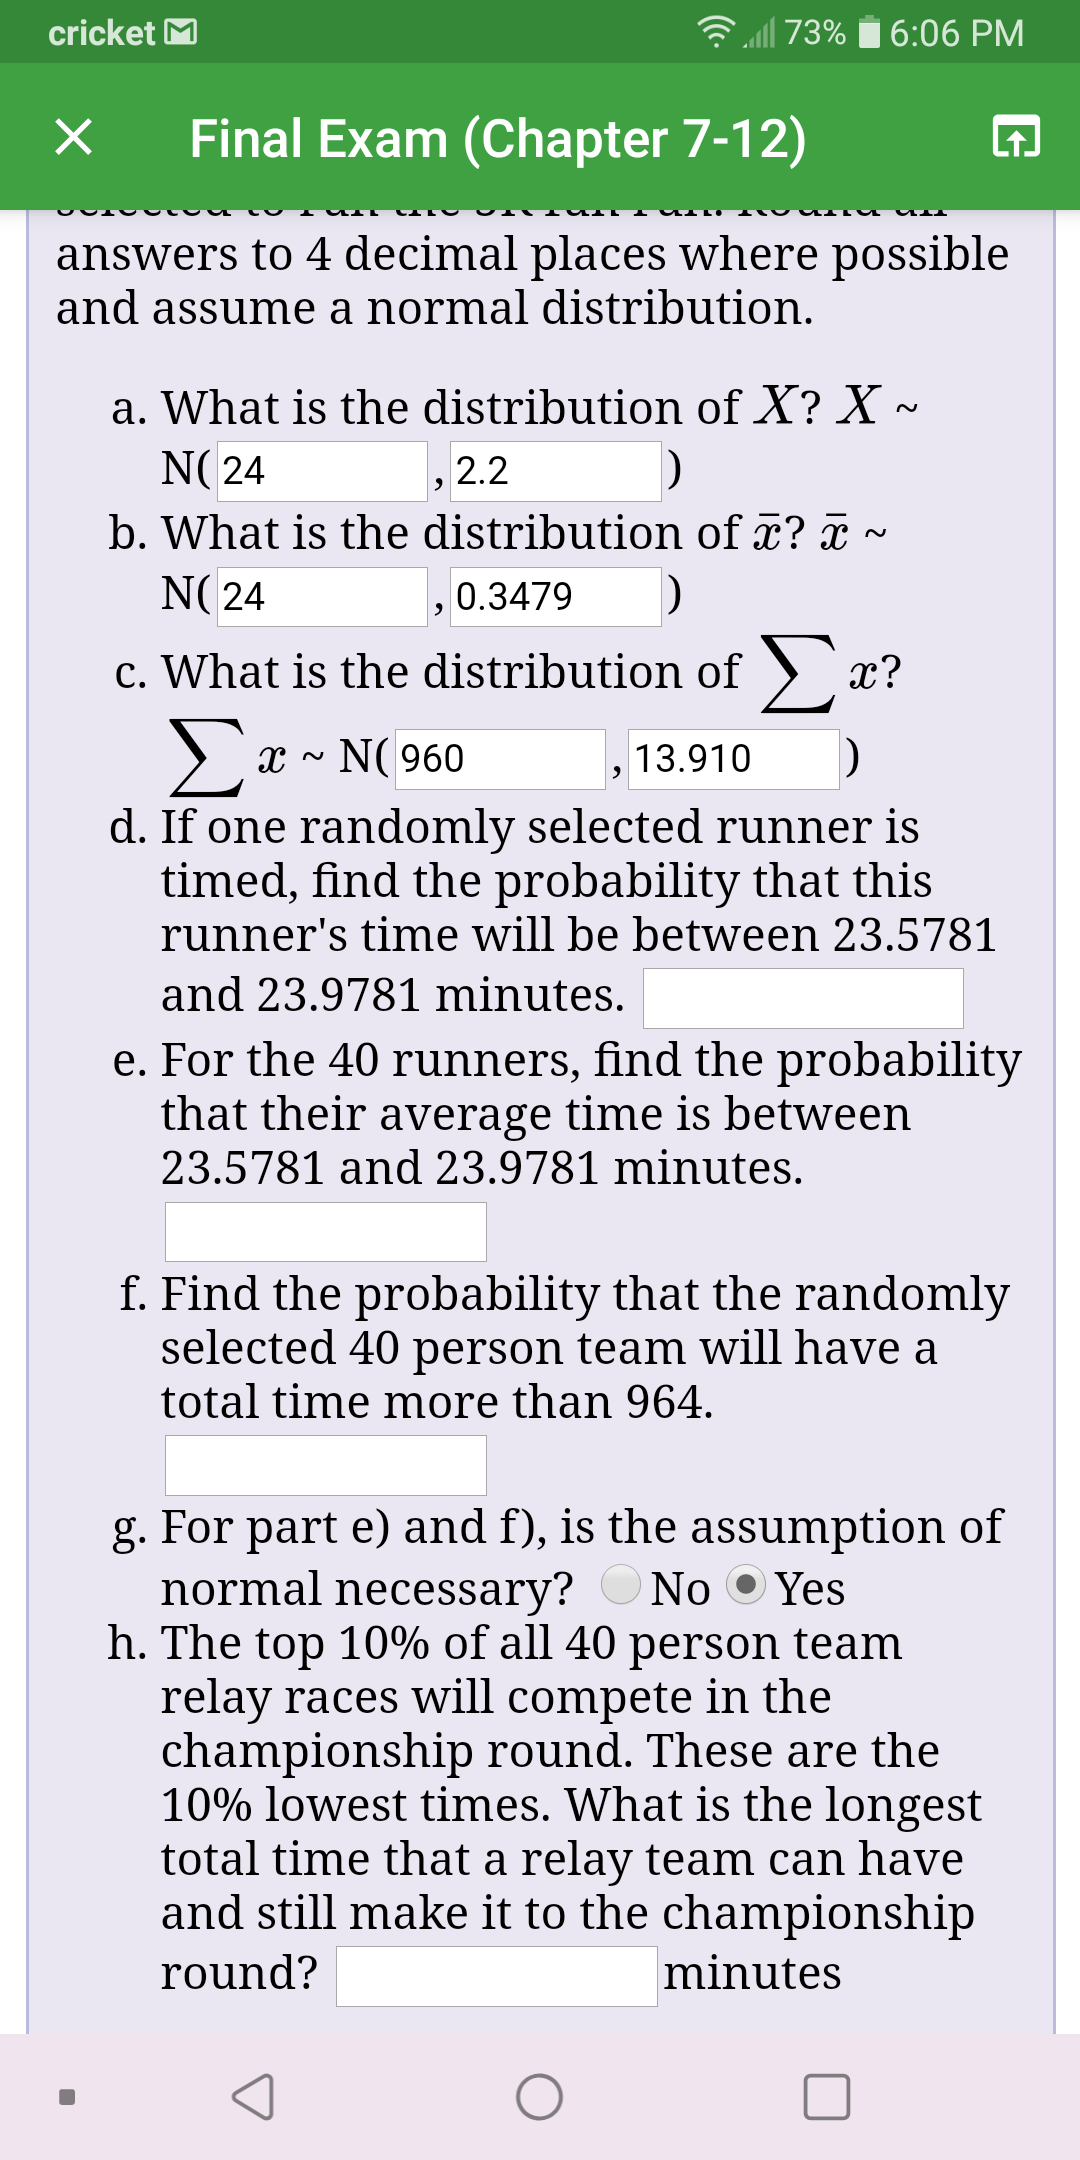 l 73%
cricket M
6:06 PM
Final Exam (Chapter 7-12)
answers to 4 decimal places where possible
and assume a normal distribution.
a. What is the distribution of X? X ~
N( 24
, 2.2
b. What is the distribution of x? x ~
N( 24
0.3479
c. What is the distribution of )
х?
Σ:
x - N( 960
13.910
d. If one randomly selected runner is
timed, find the probability that this
runner's time will be between 23.5781
and 23.9781 minutes.
e. For the 40 runners, find the probability
that their average time is between
23.5781 and 23.9781 minutes.
f. Find the probability that the randomly
selected 40 person team will have a
total time more than 964.
g. For part e) and f), is the assumption of
normal necessary?
h. The top 10% of all 40 person team
relay races will compete in the
championship round. These are the
10% lowest times. What is the longest
total time that a relay team can have
and still make it to the championship
No O Yes
round?
minutes
